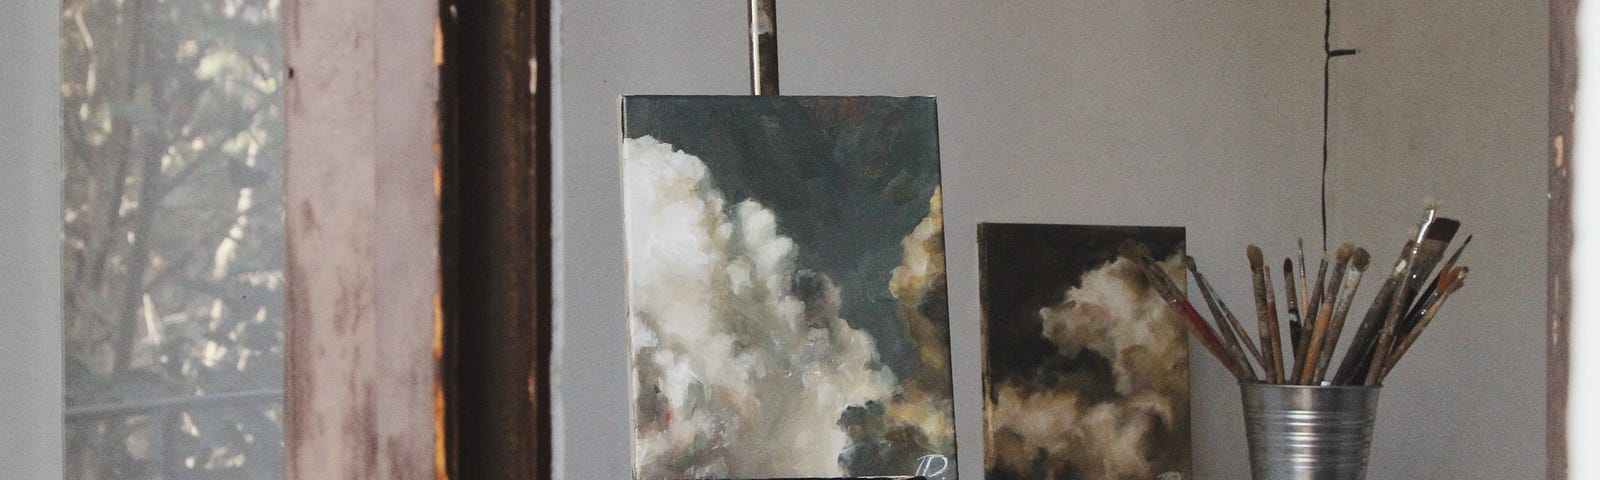 canvas with a painting of clouds in barren room